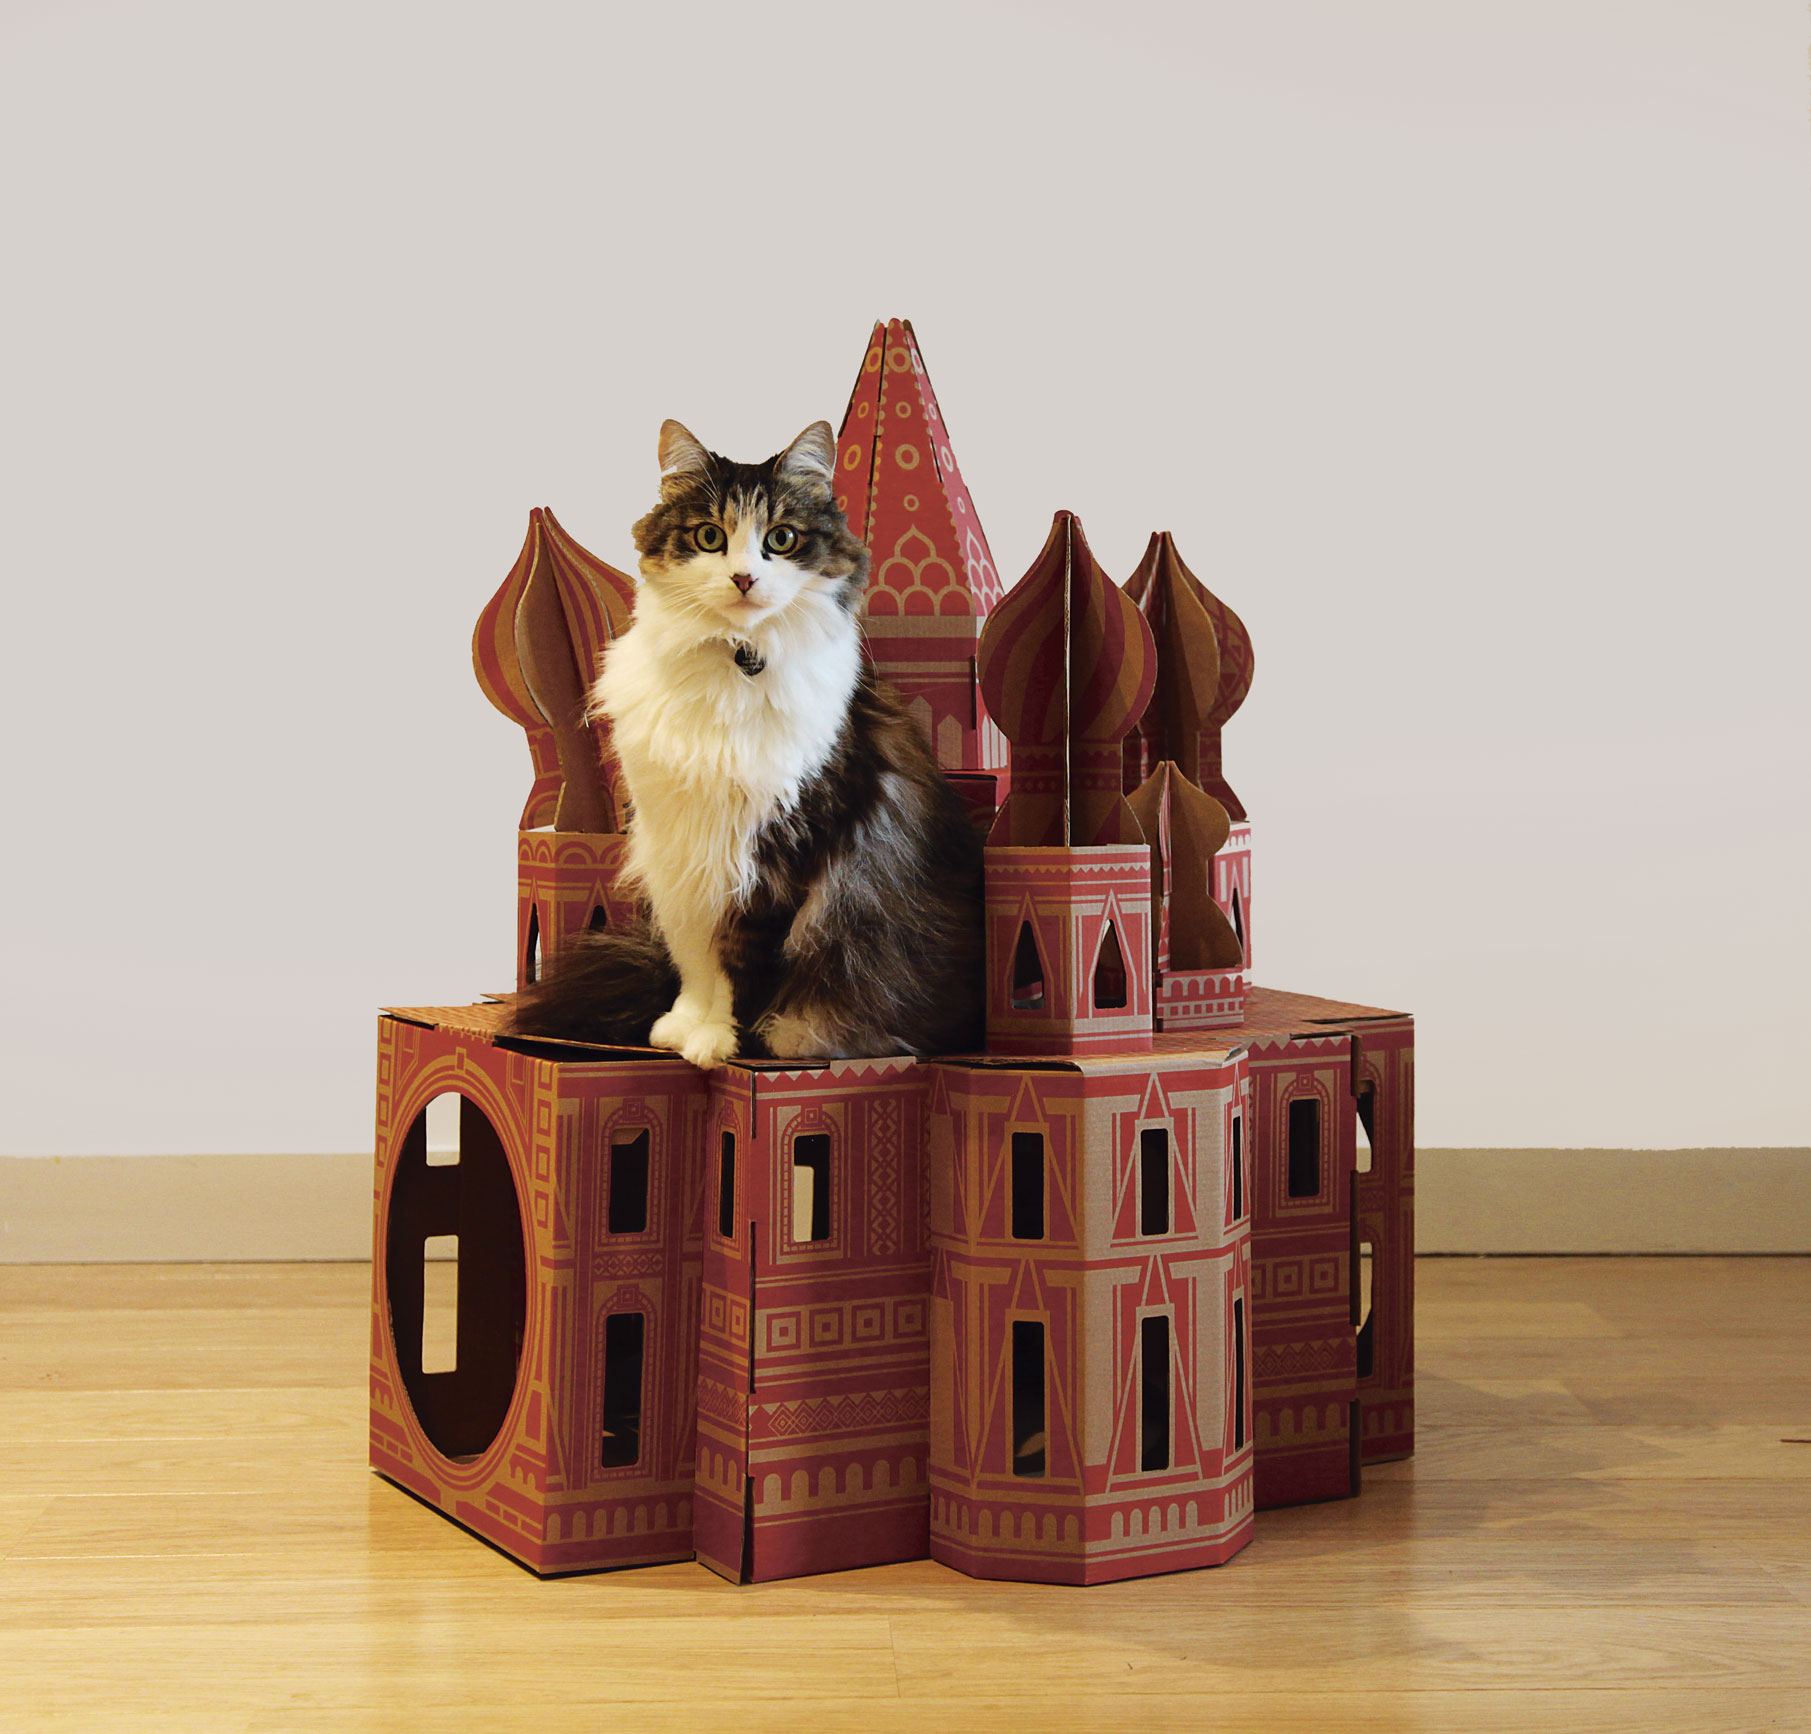 Lily poses on Landmarks by Poopy Cat from Pet-tecture